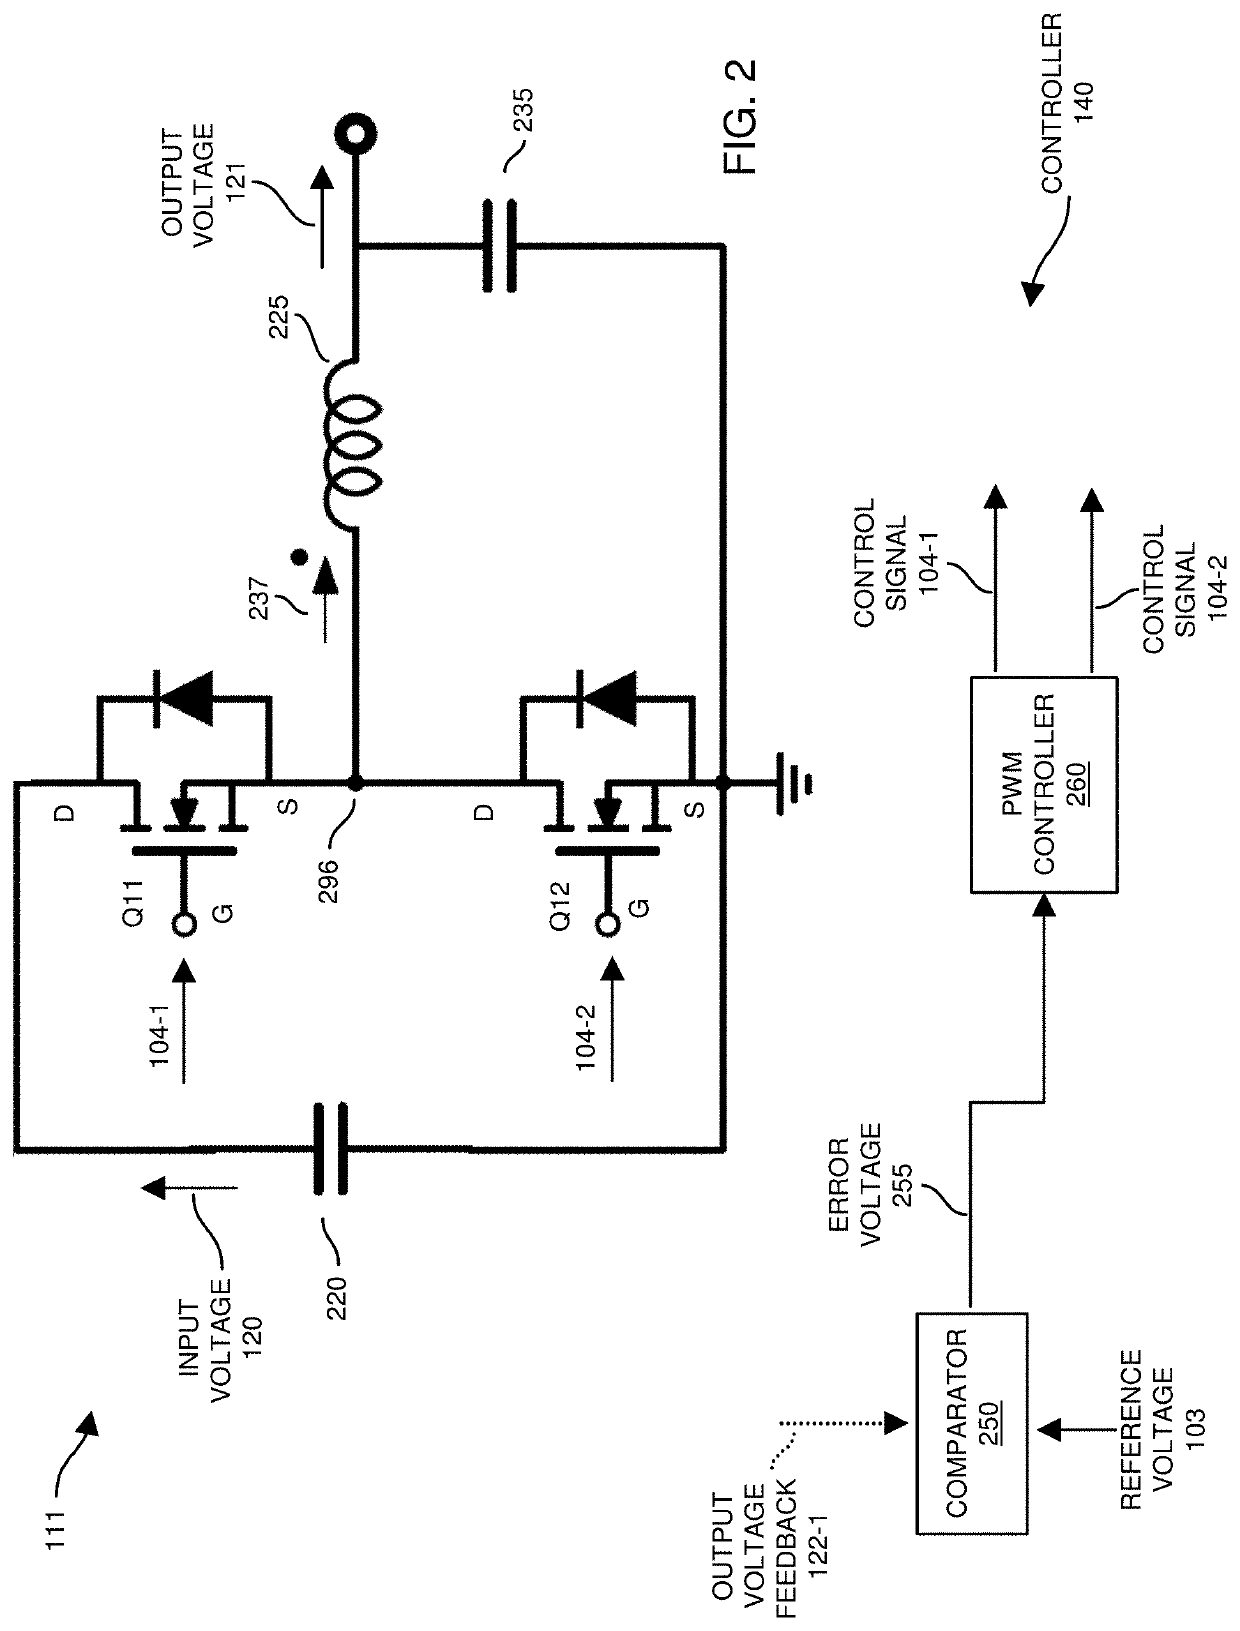 Multiple-stage power conversion via regulated and unregulated conversion